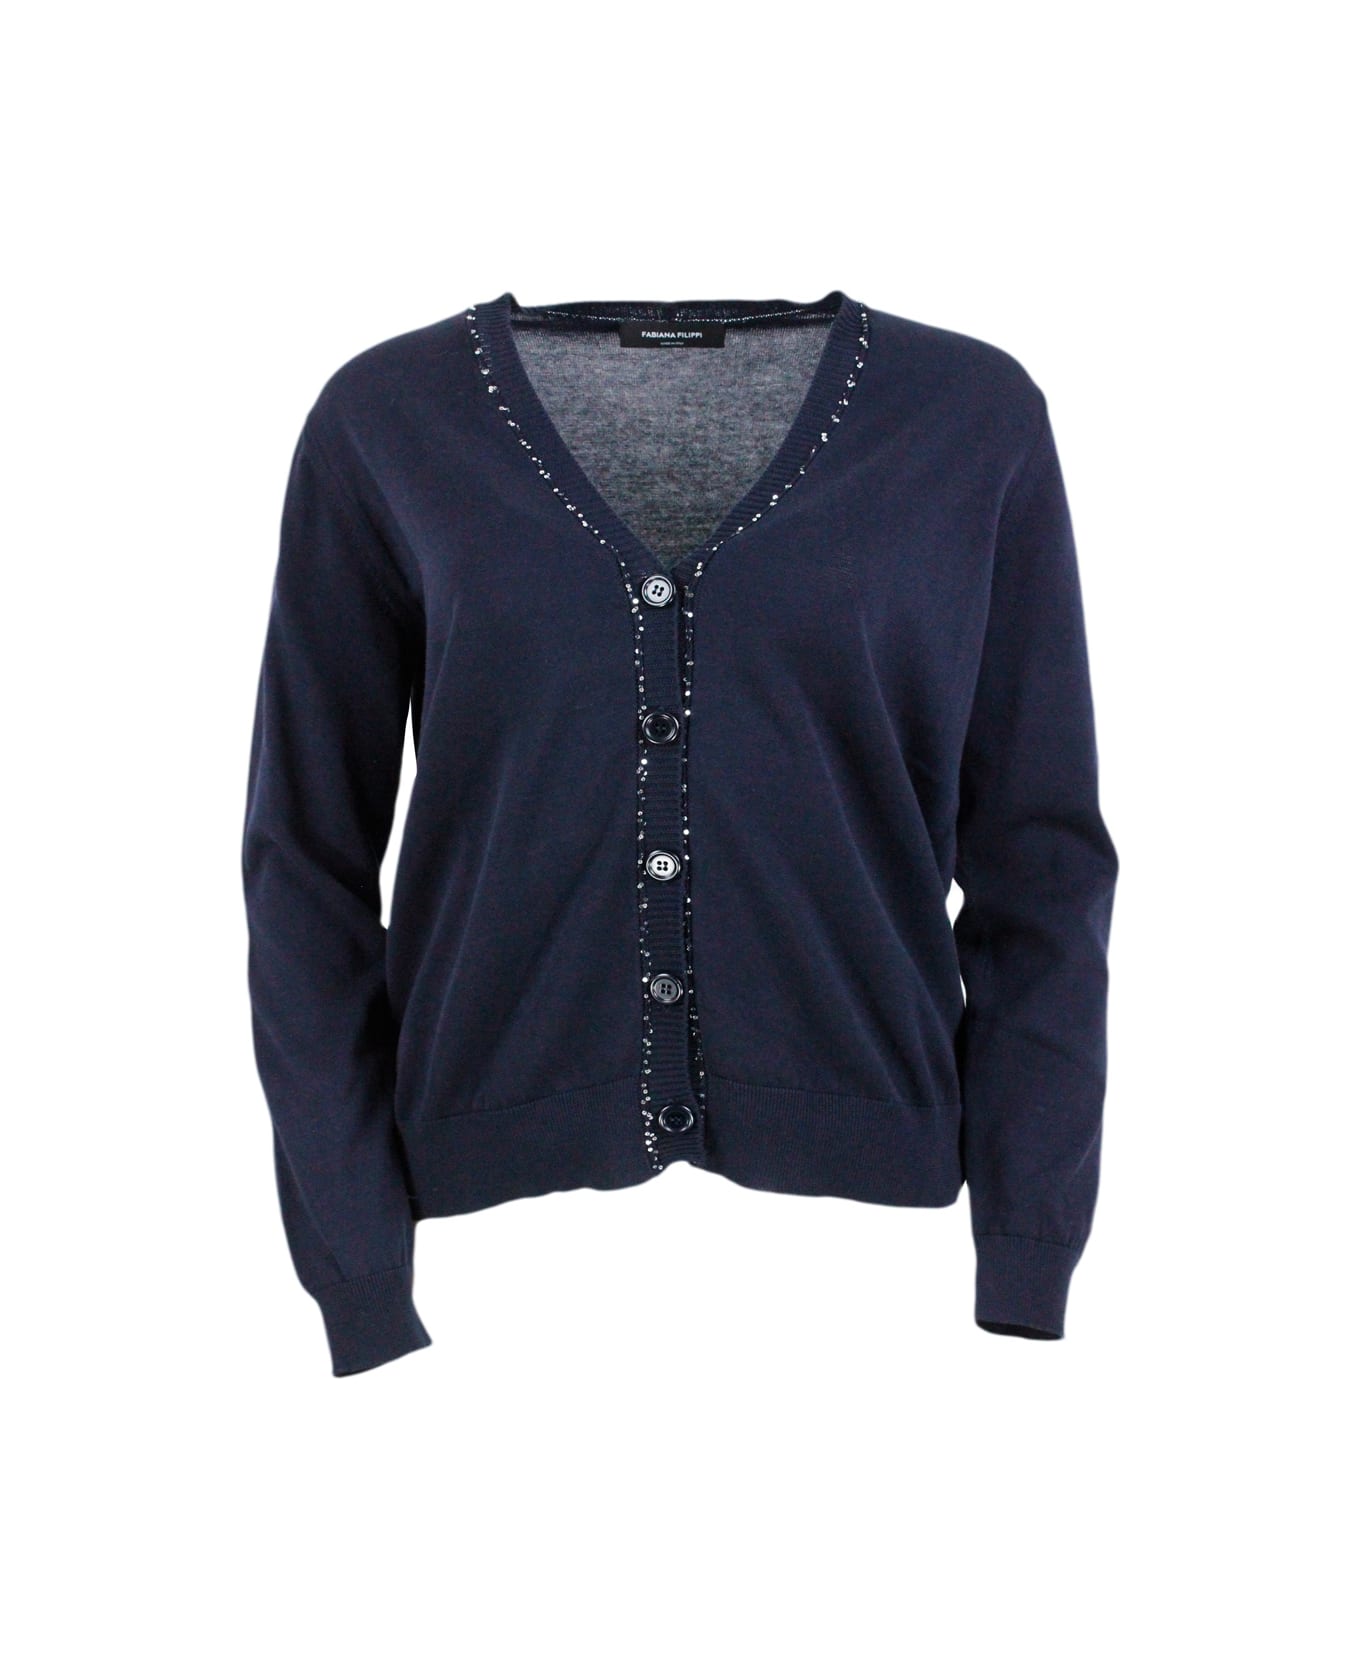 Fabiana Filippi Long-sleeved Cardigan Sweater With Buttons In Fine Cotton Embellished With Brilliant Applied Micro-sequins - Blu カーディガン